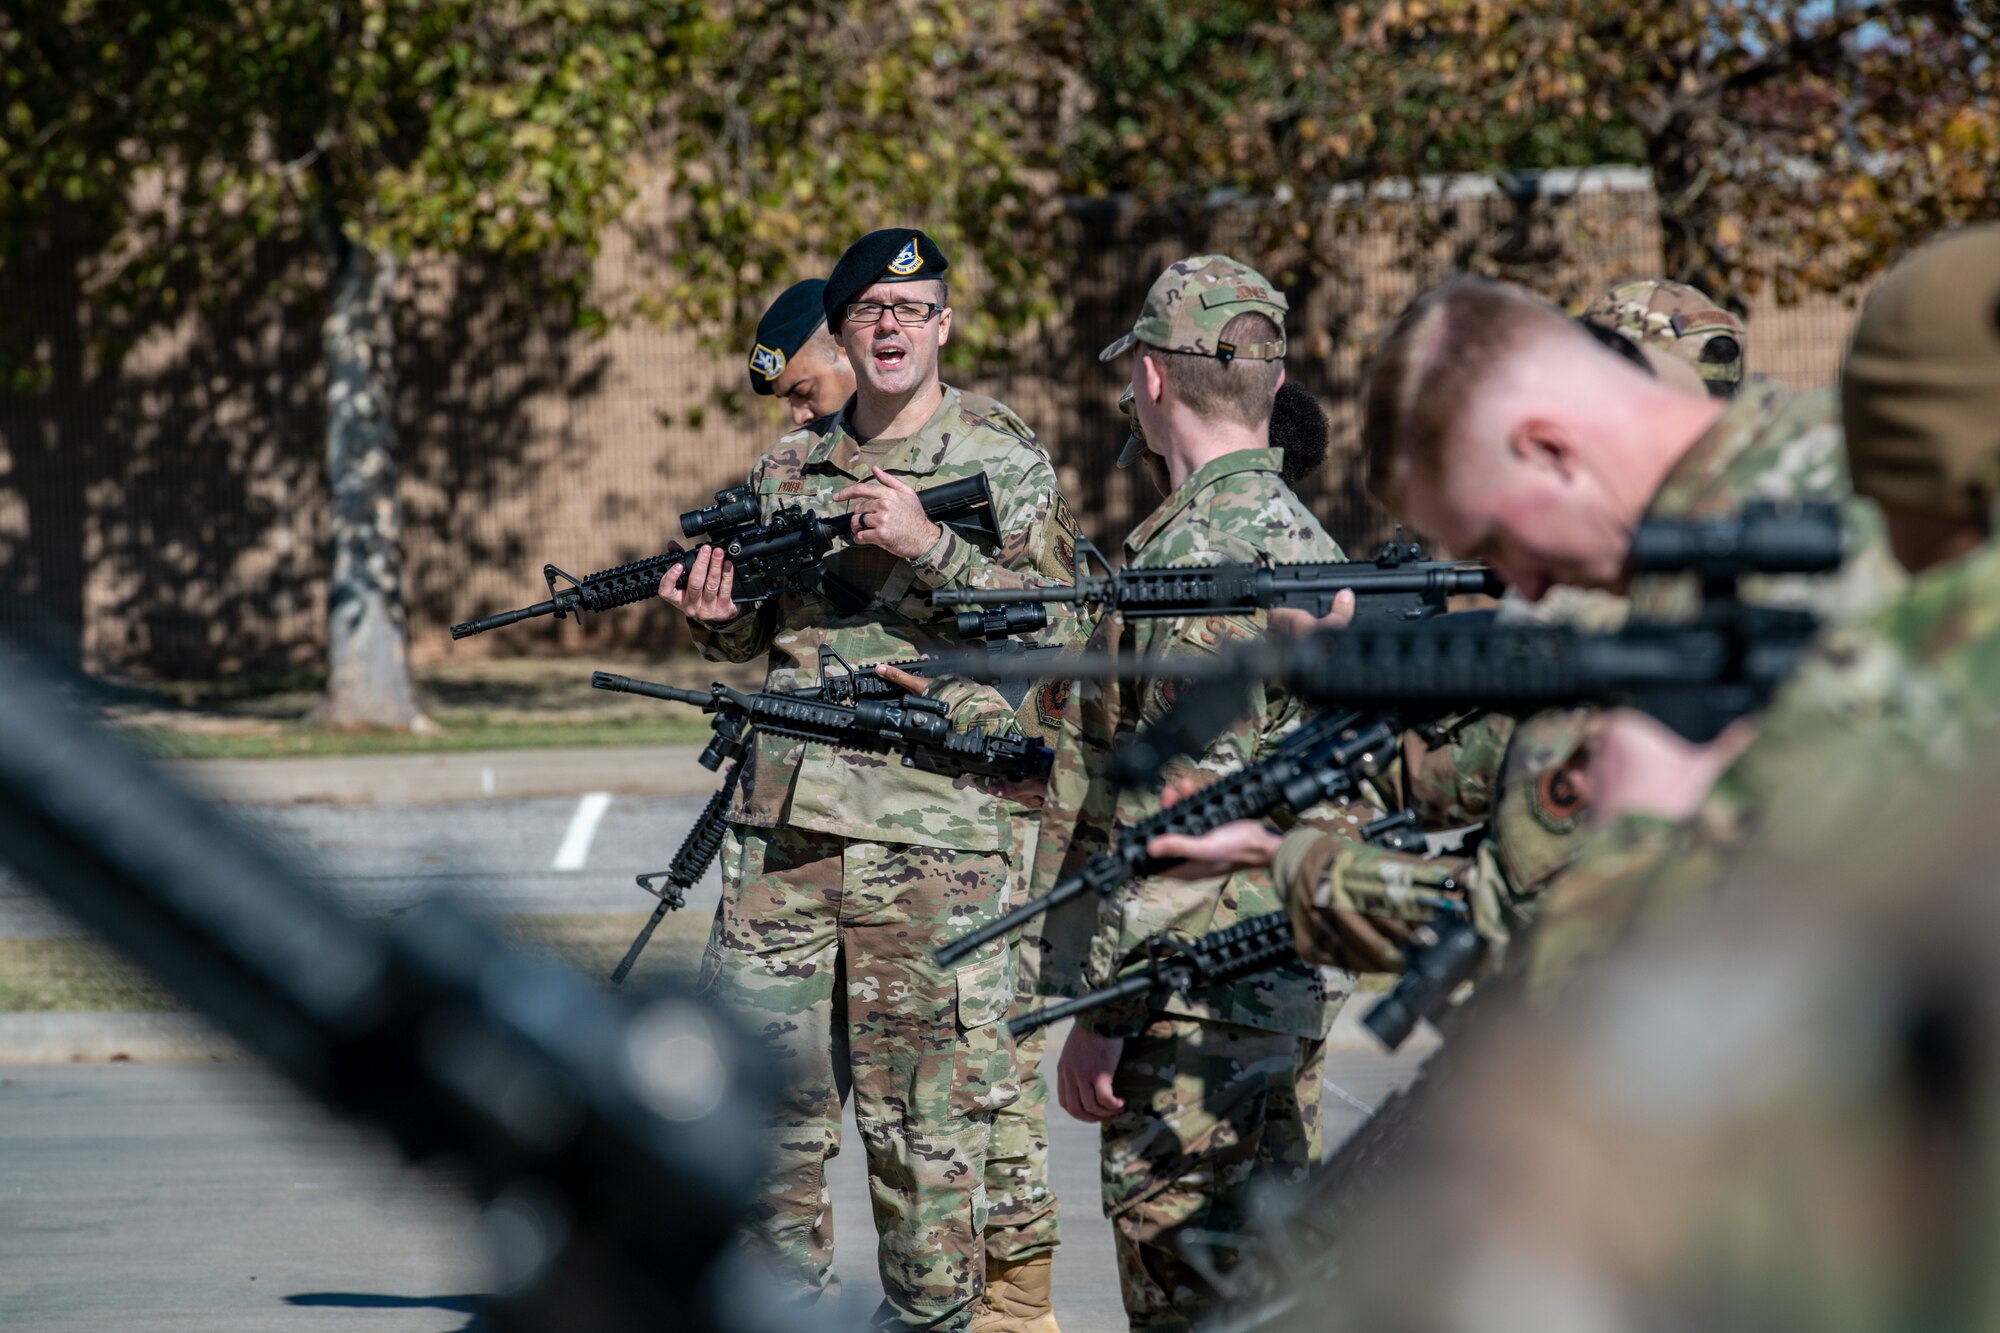 Airmen clear weapons during a training demonstration